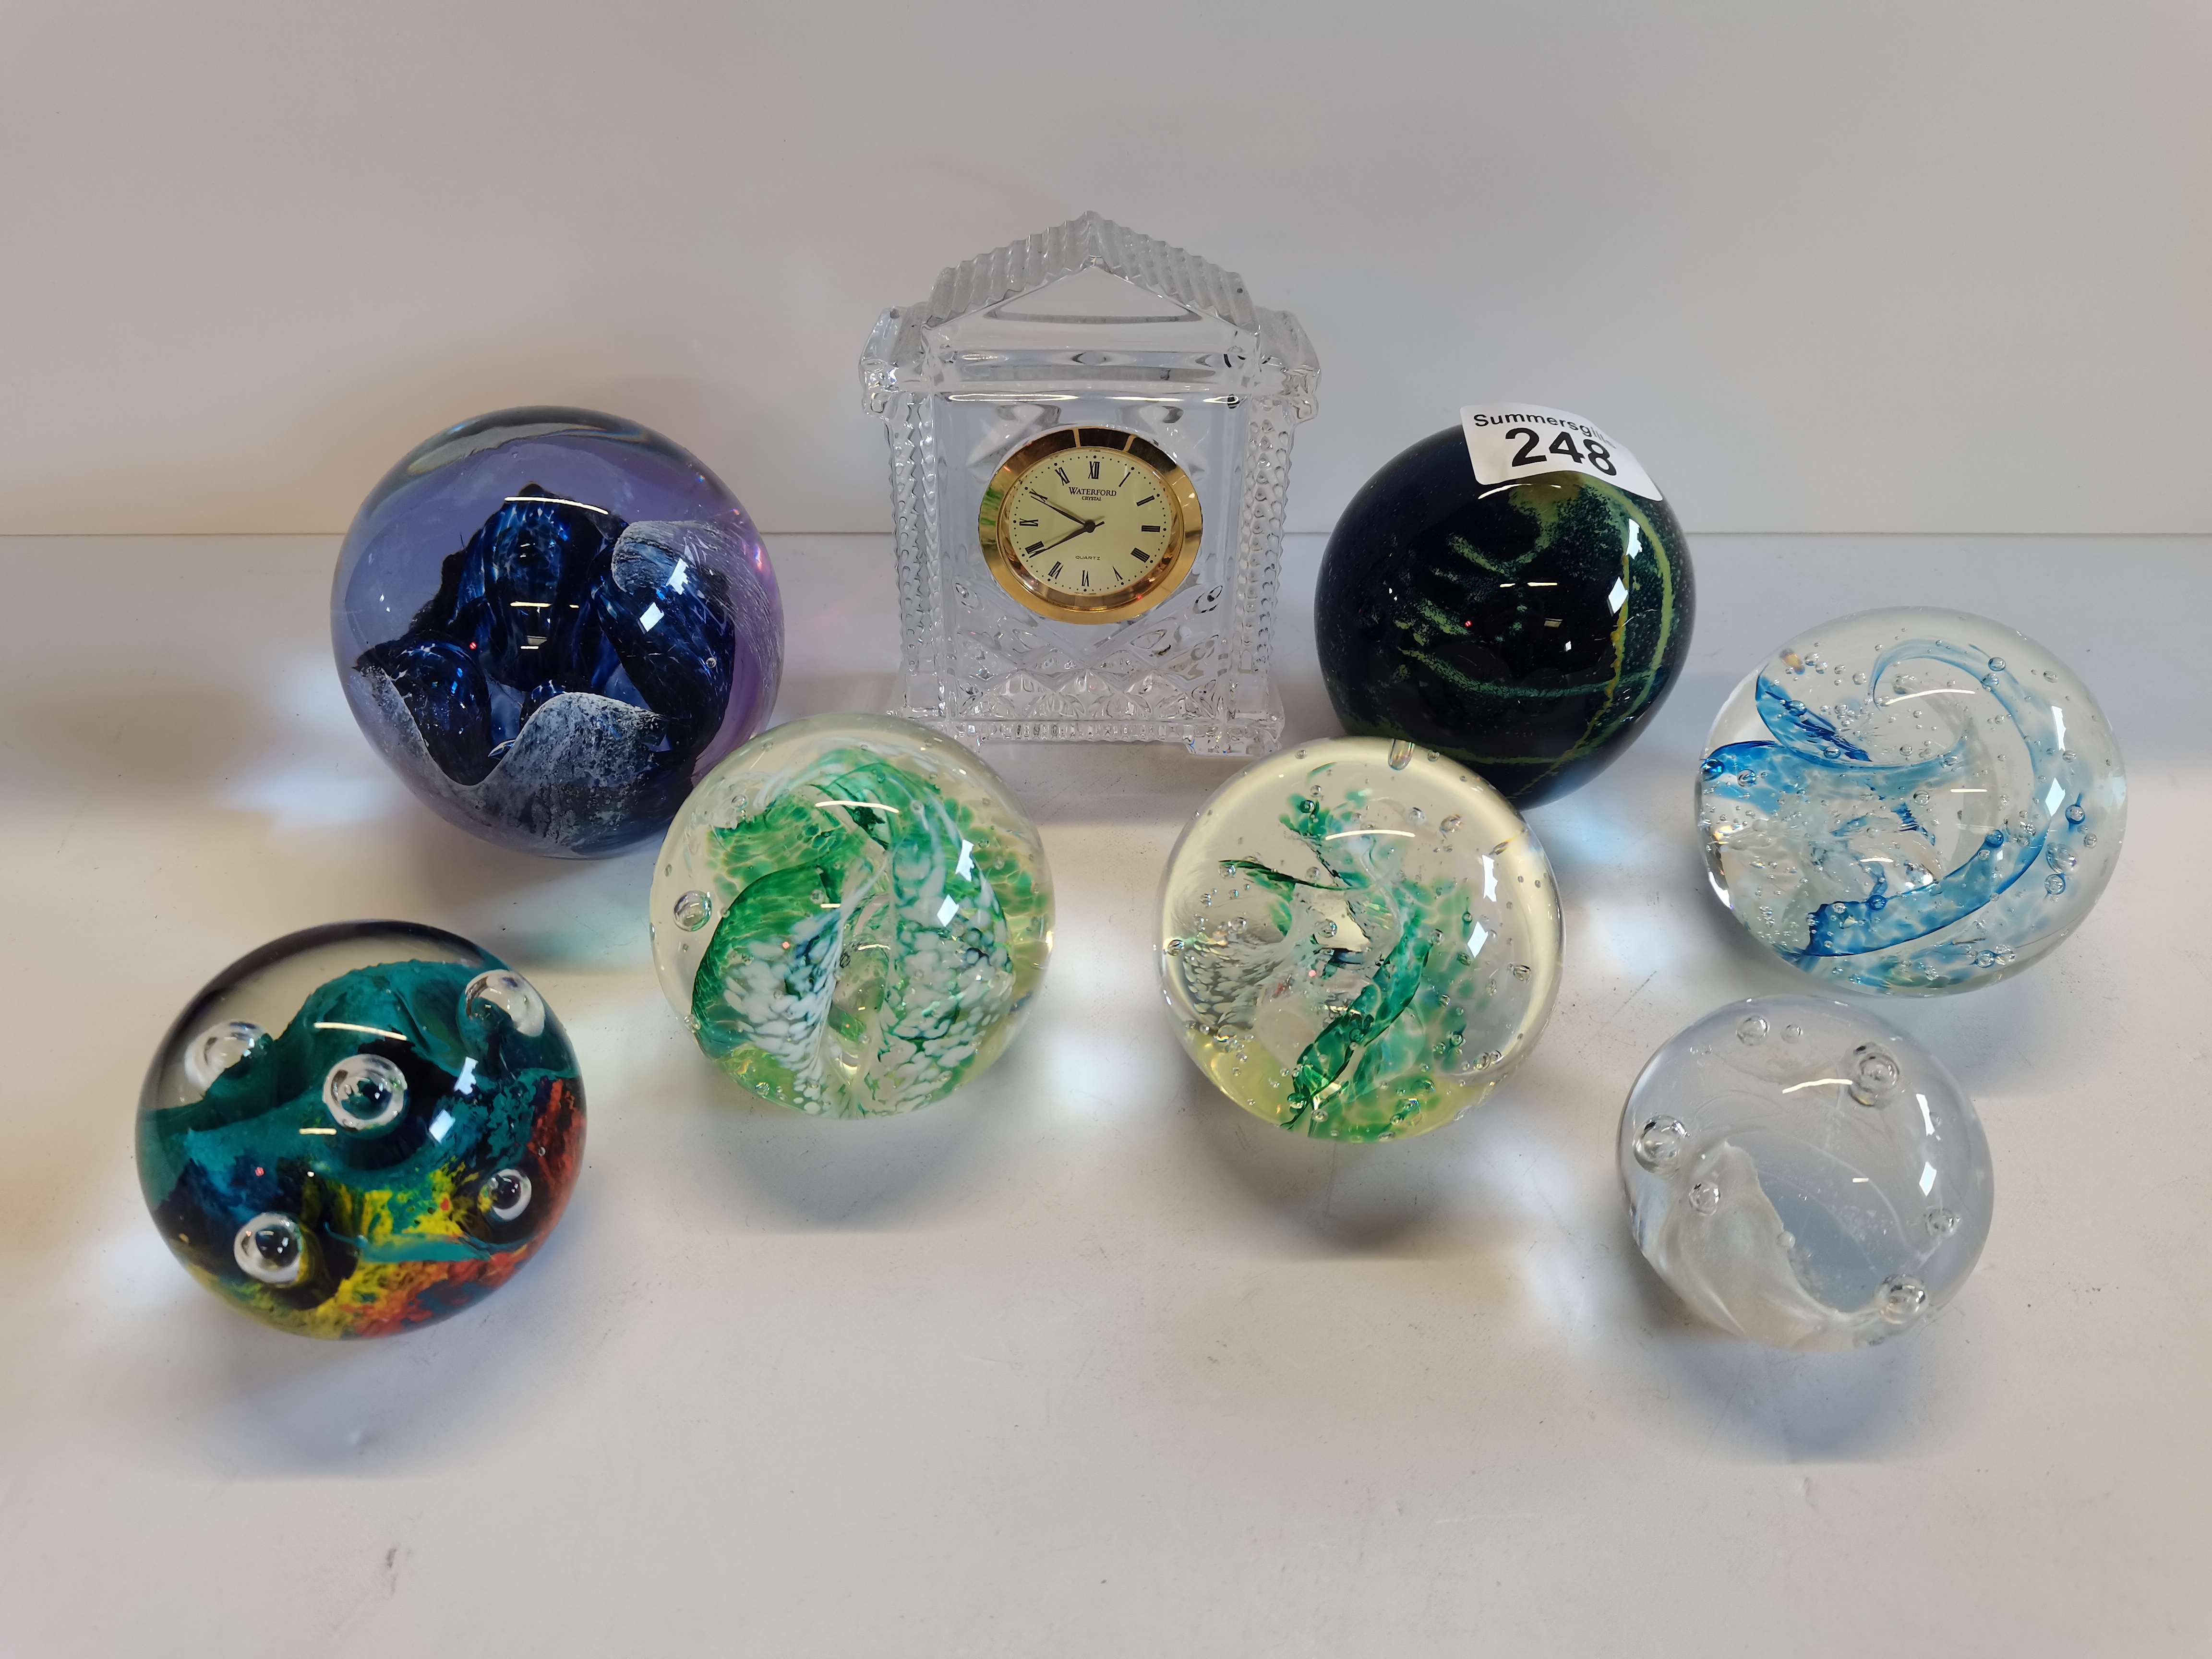 X7 glass paperweights and a glass mantle clock